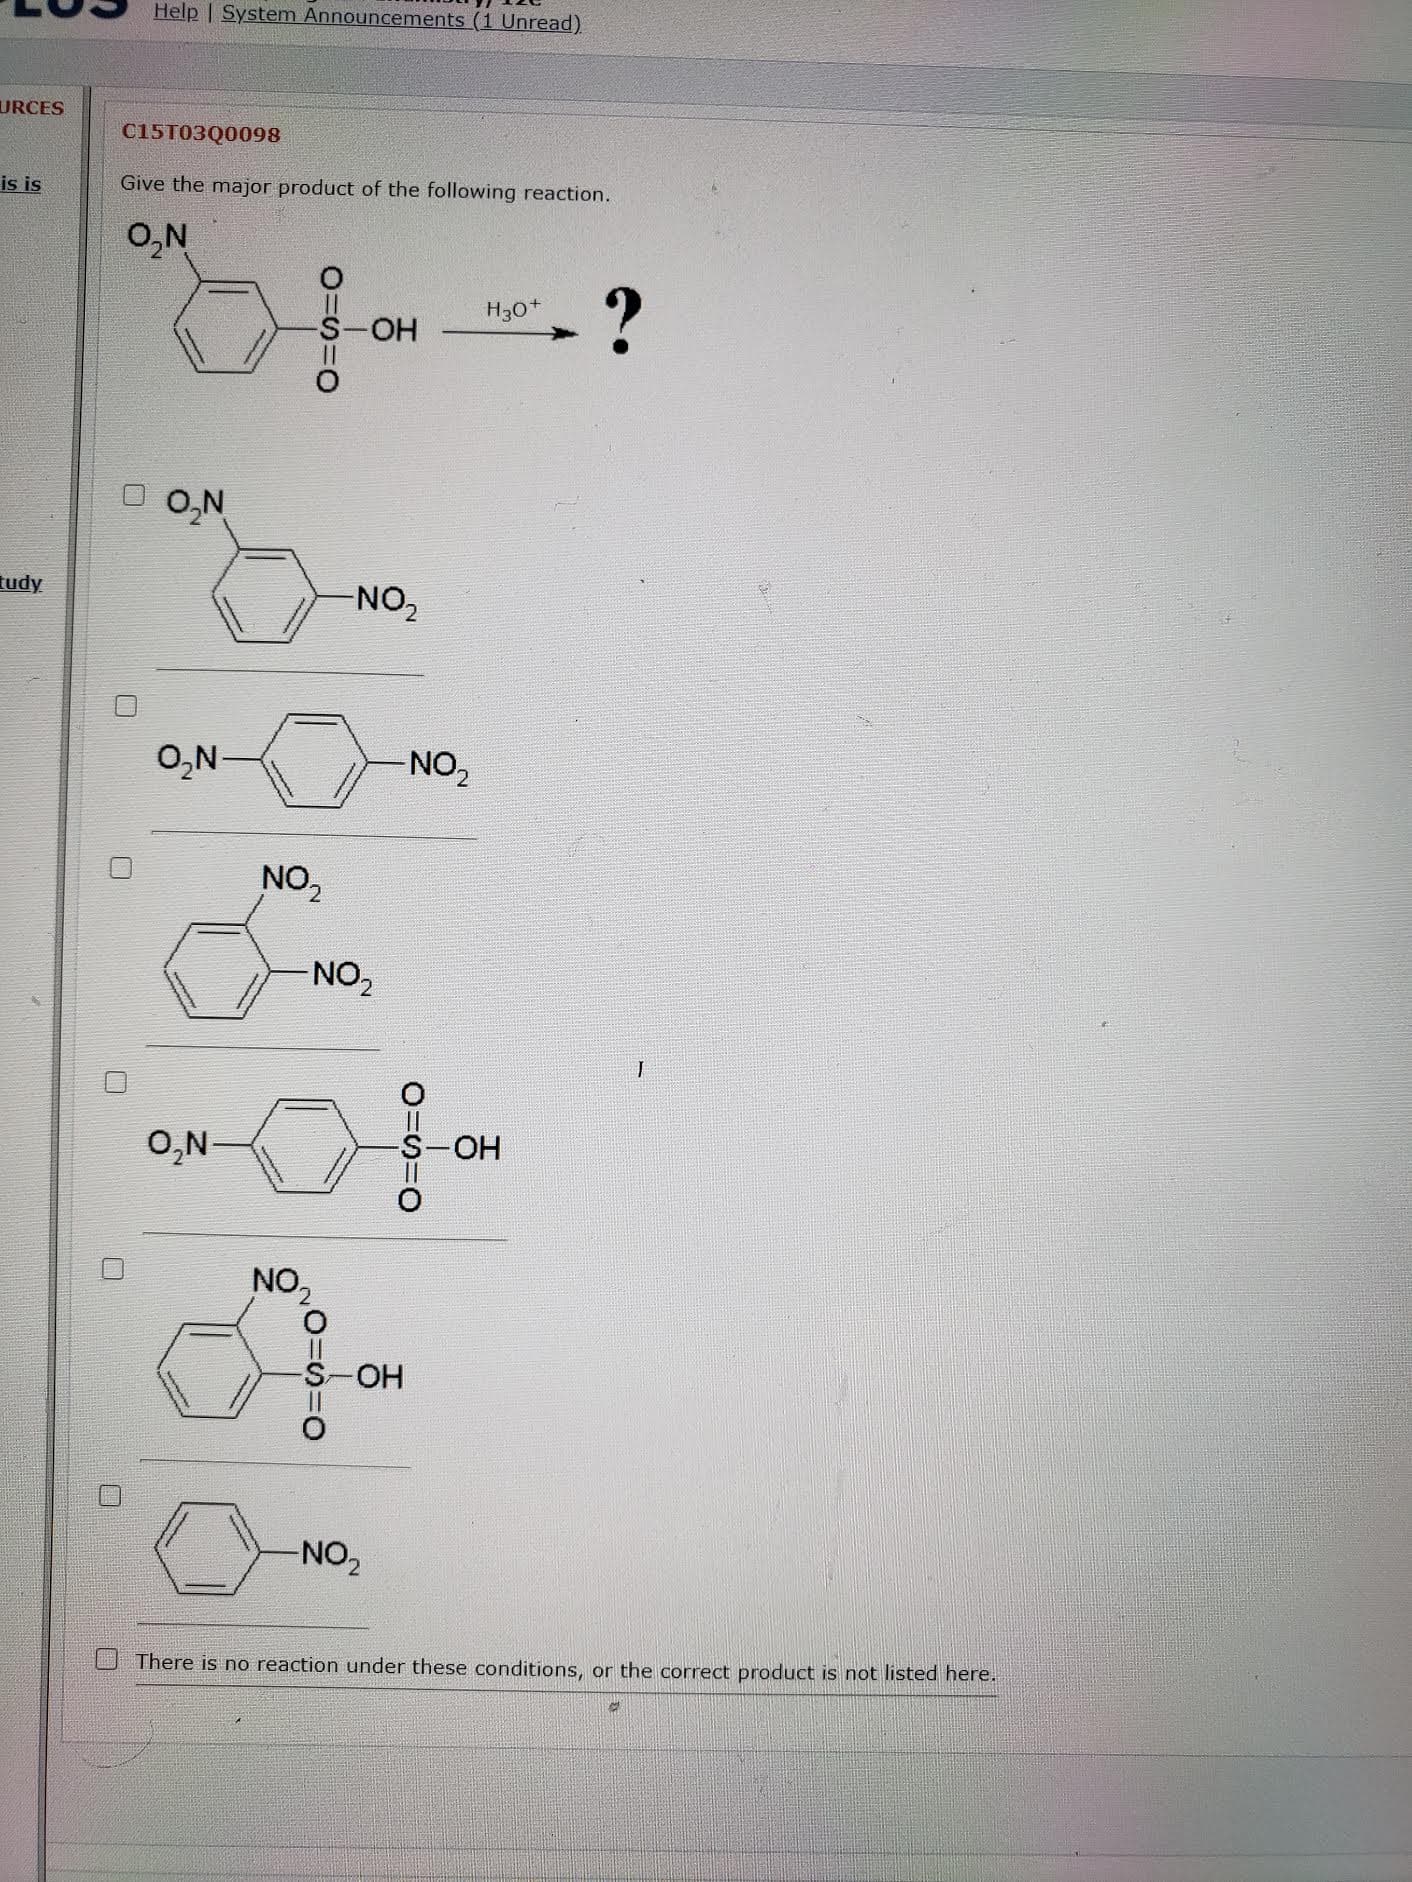 Give the major product of the following reaction.
O,N
- ?
H30*
S-OH
O,N
NO2
O,N-
NO,
NO2
NO2
O,N-
-HO-
NO,
S-OH
NO2
J There is no reaction under these conditions, or the correct product is not listed here.
=の=O
